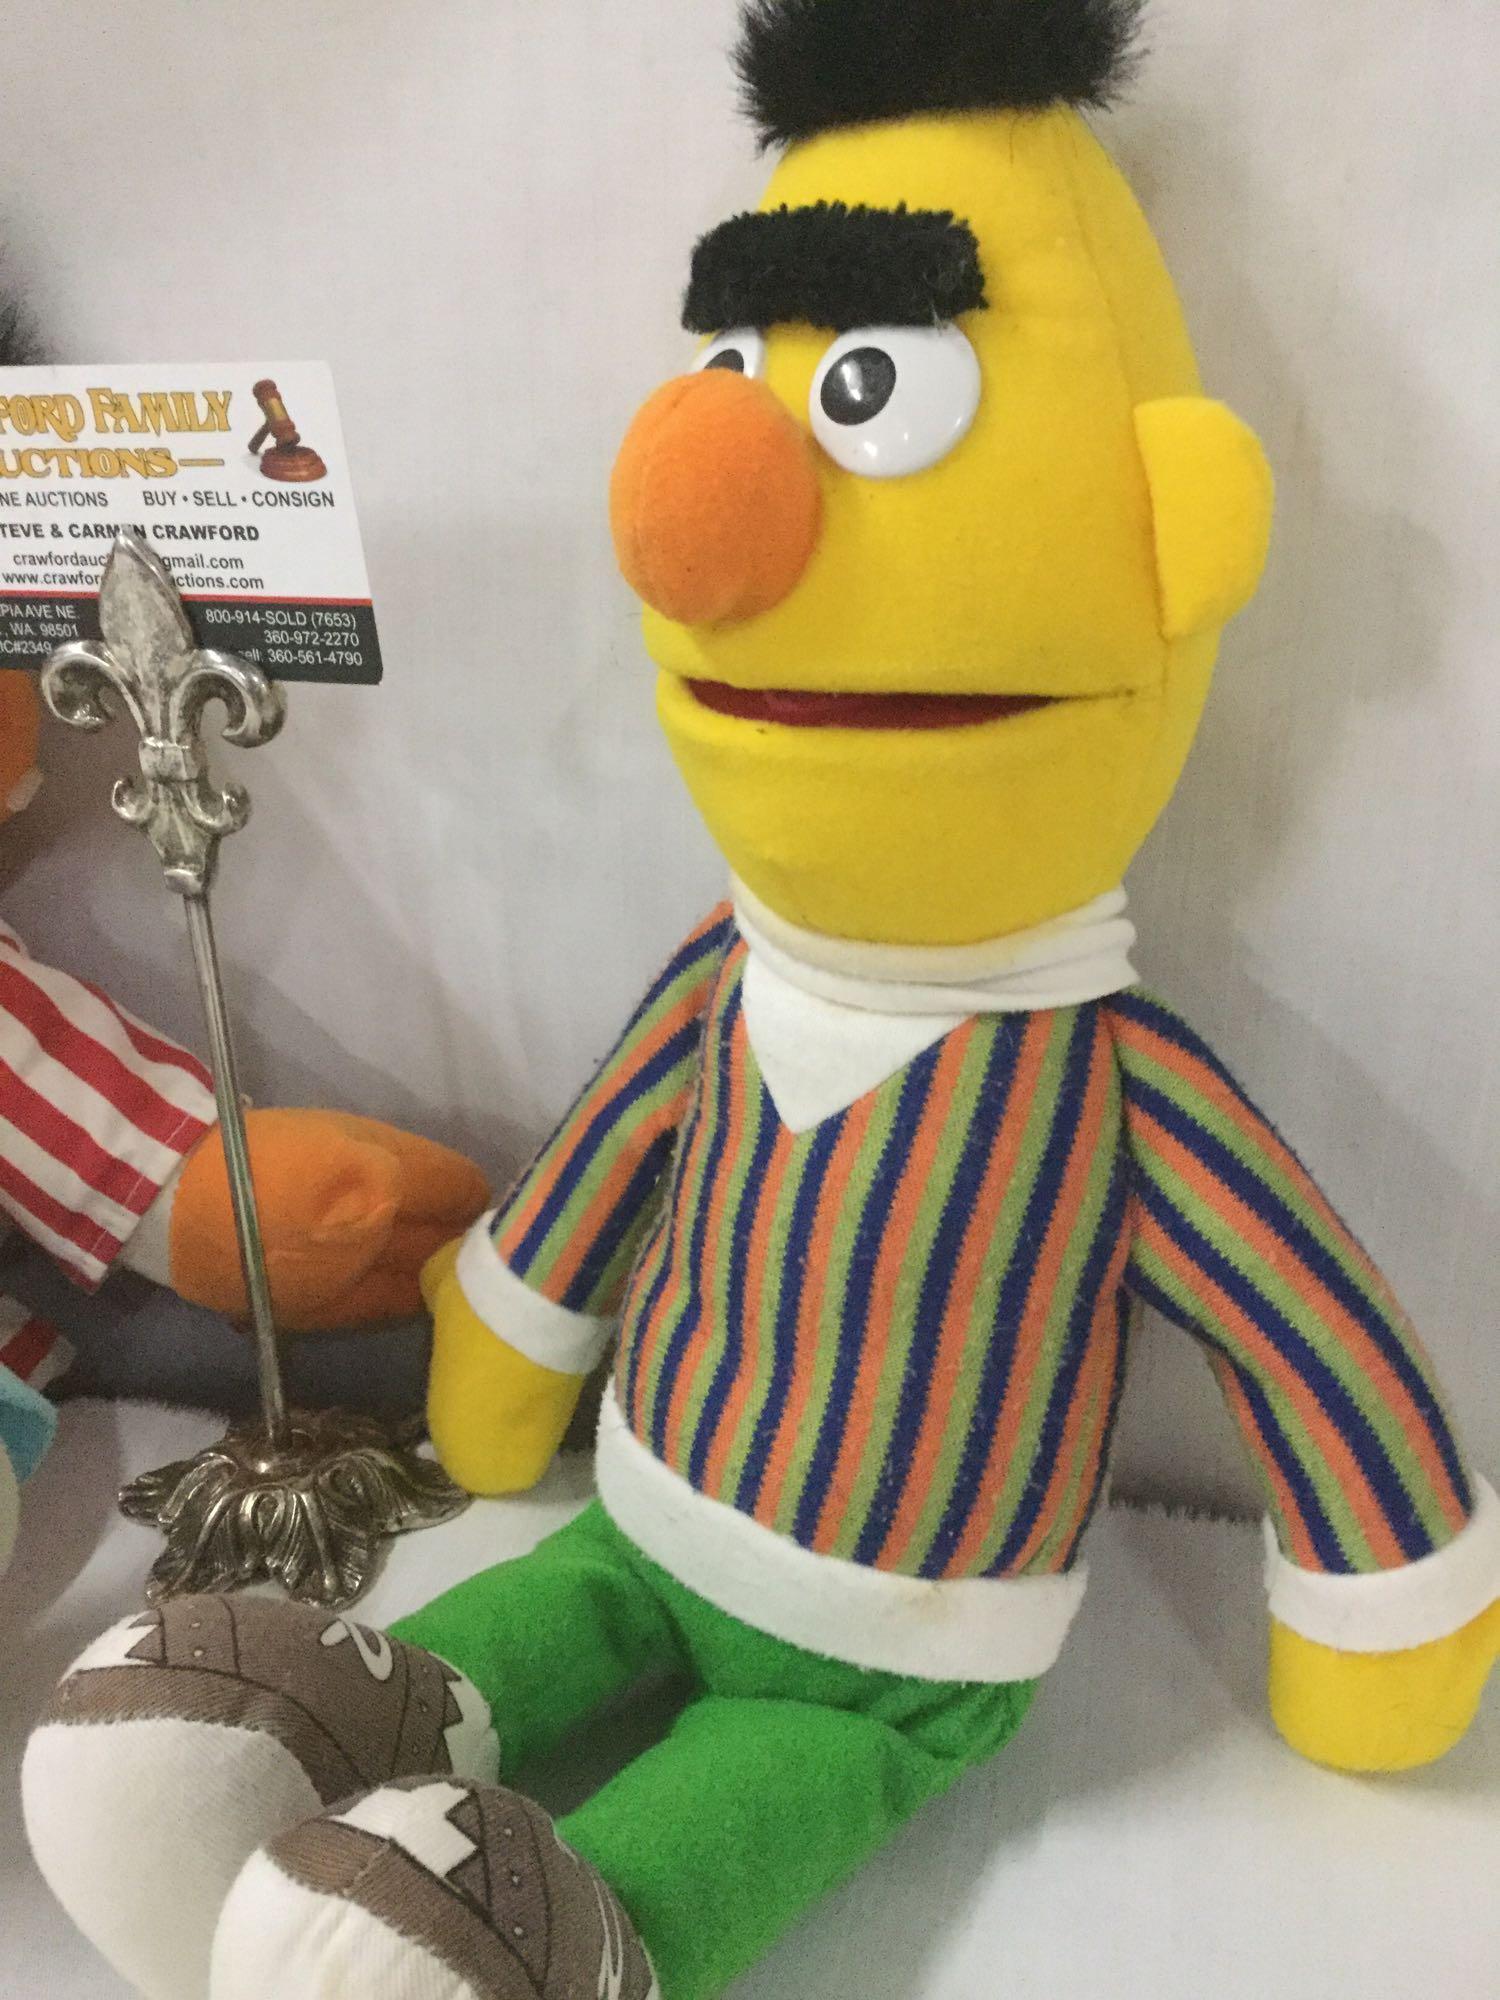 Bert and Ernie Sesame Street plush toys from Tyco. Ernie has a voicebox that is tested and working.